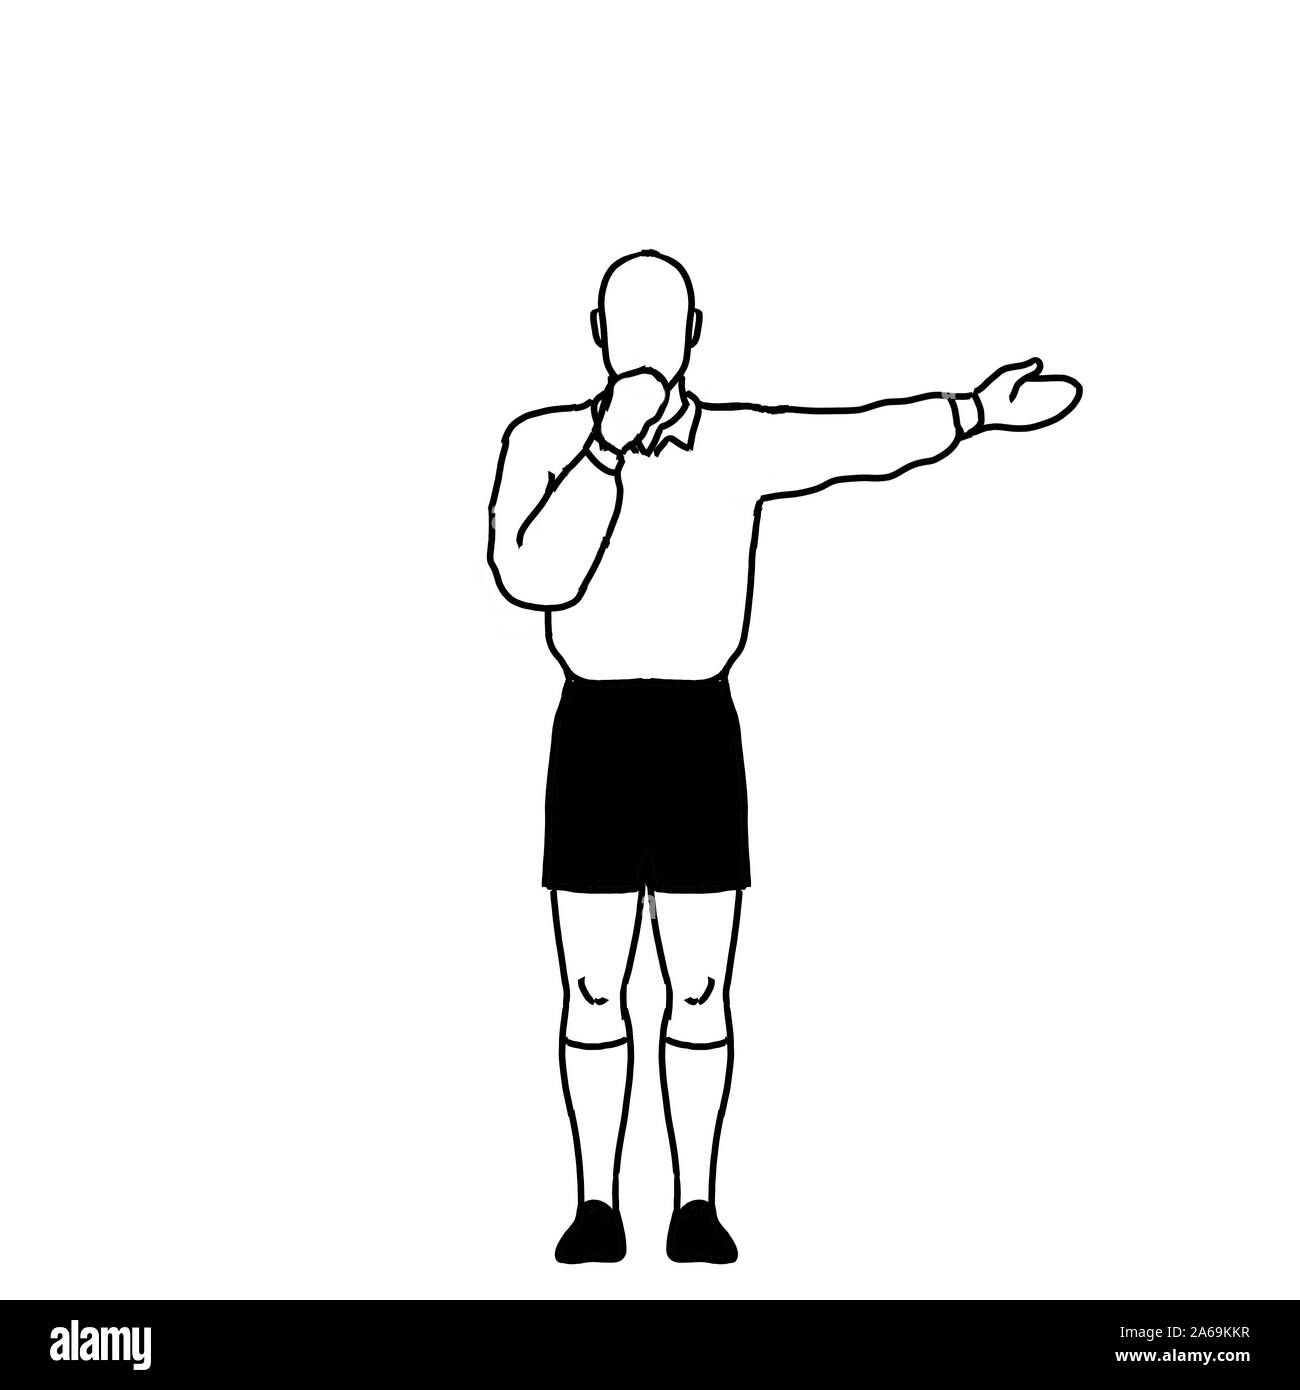 Retro style line drawing illustration showing a rugby referee with penalty Direct Free Kick hand signal on isolated background in black and white. Stock Photo